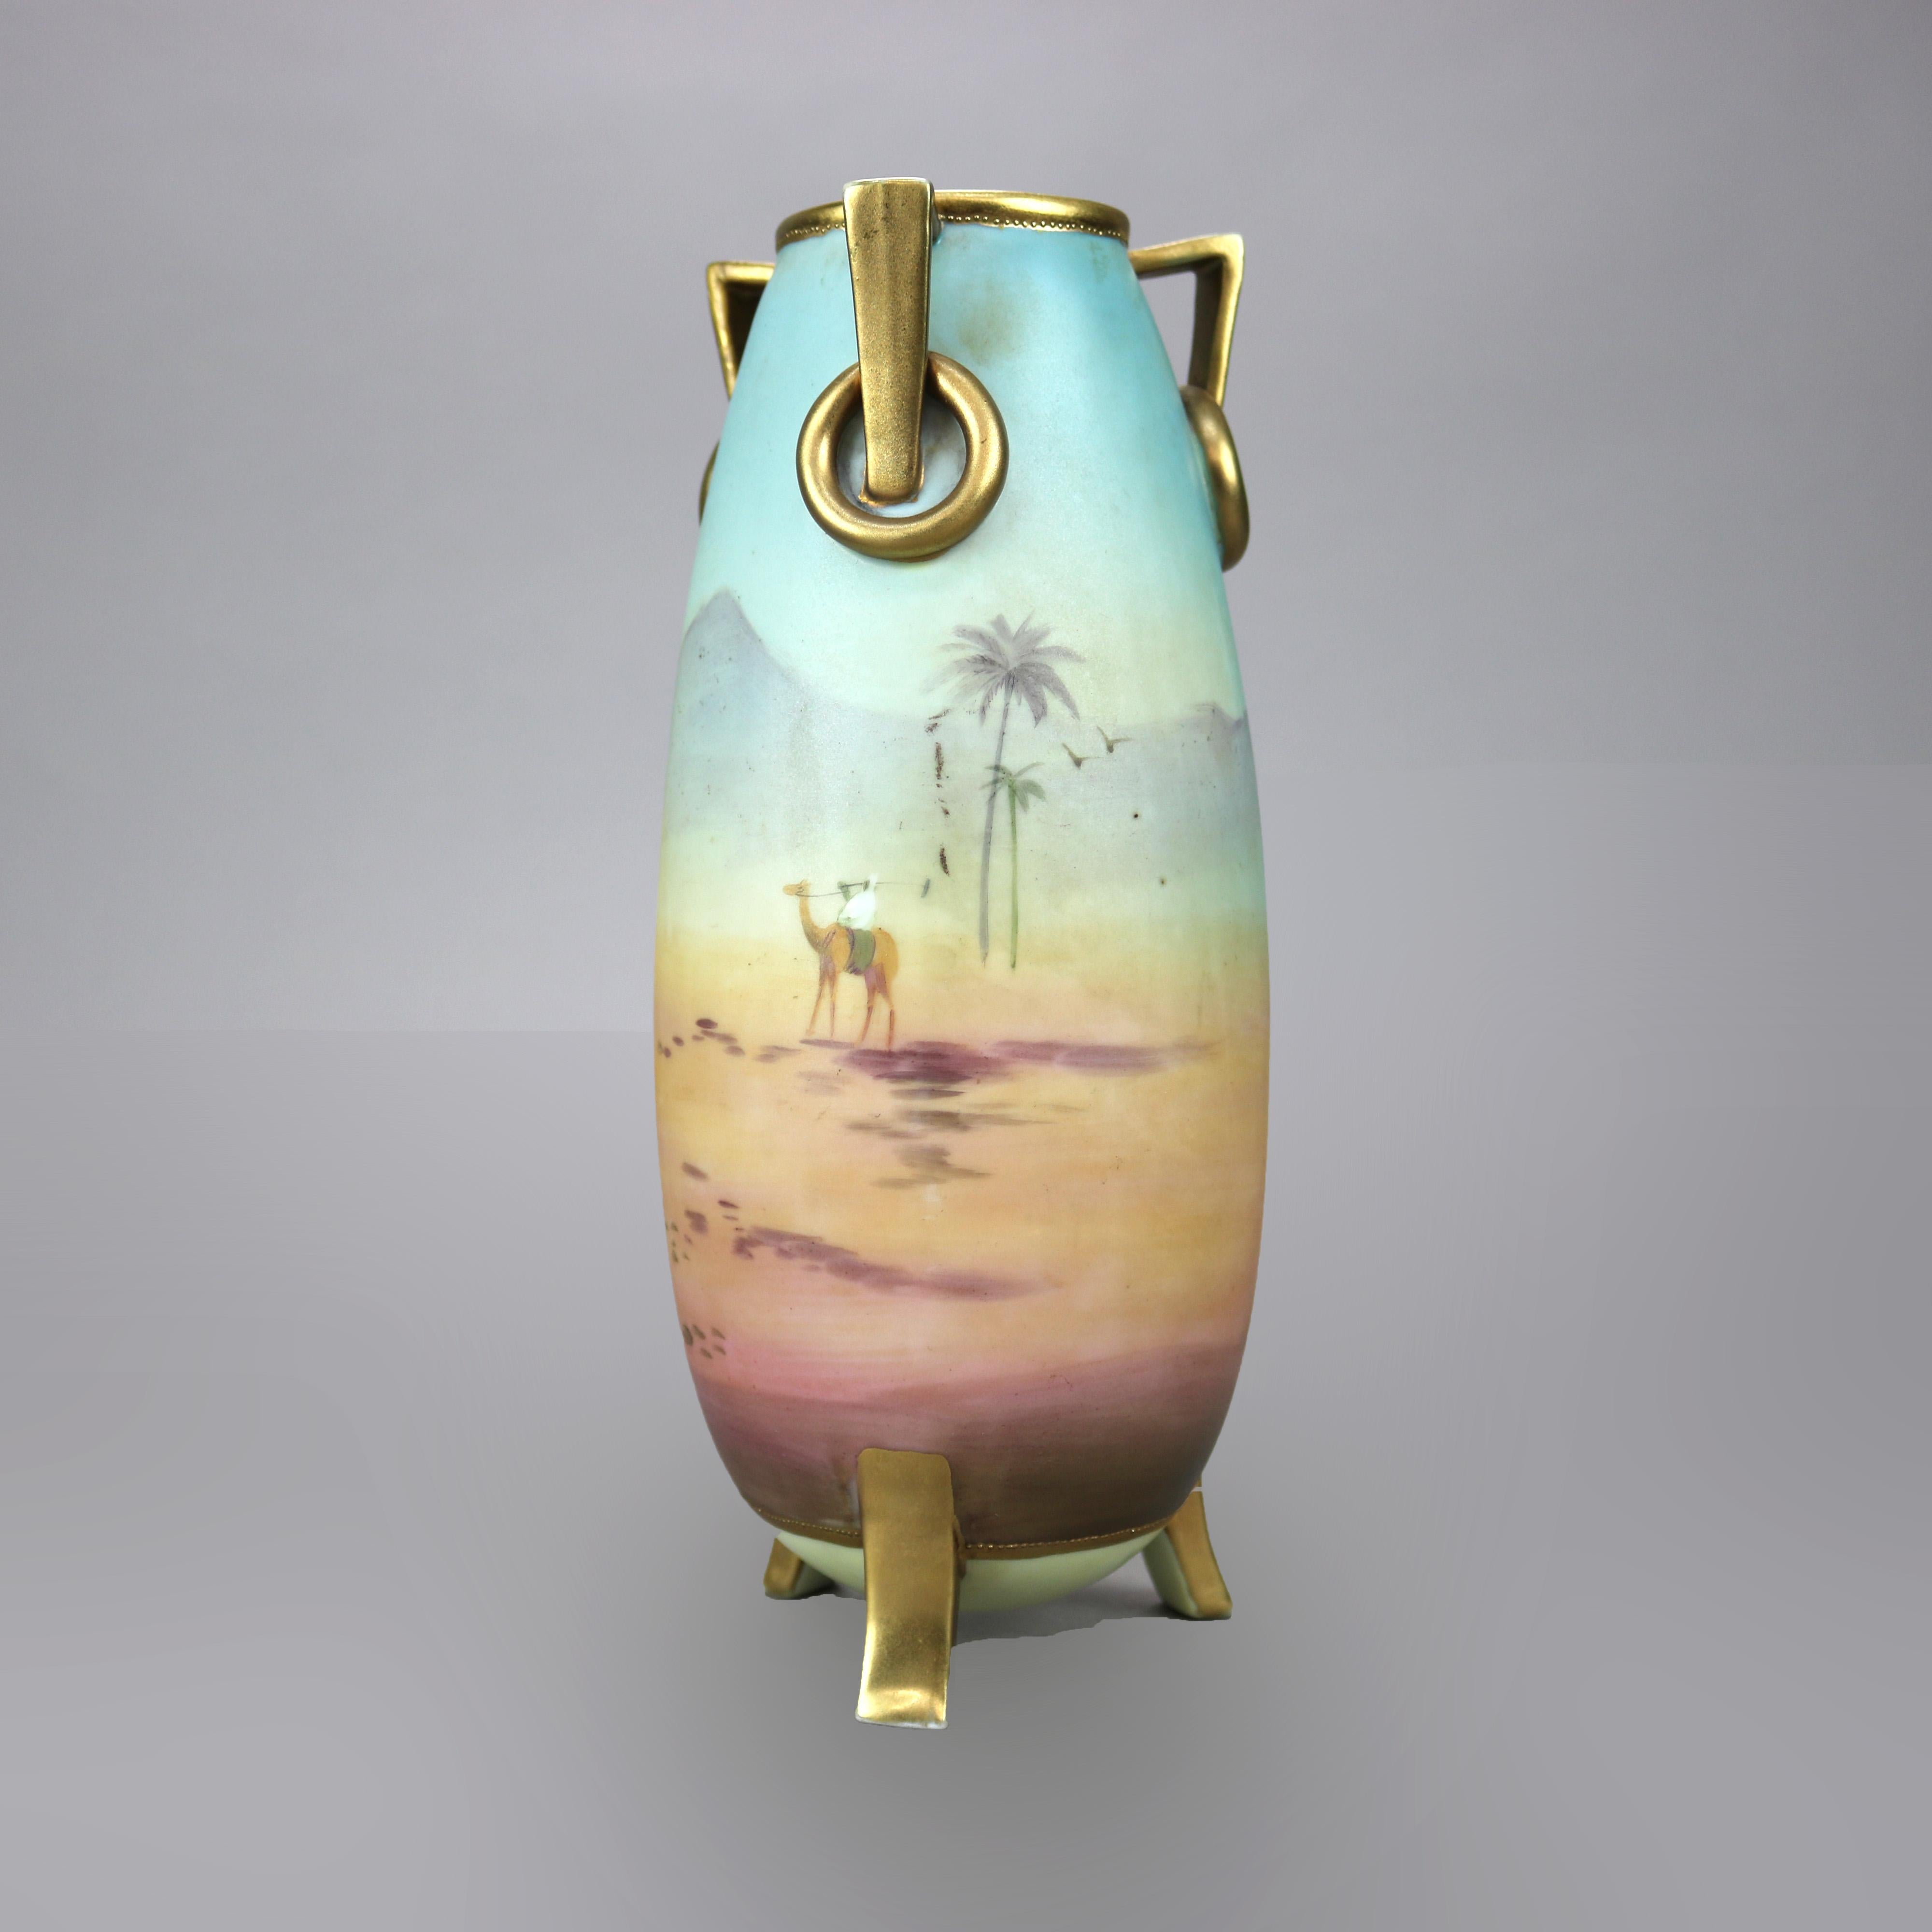 Gilt Antique Egyptian Revival Hand Painted Nippon Porcelain Footed Vase, c1900